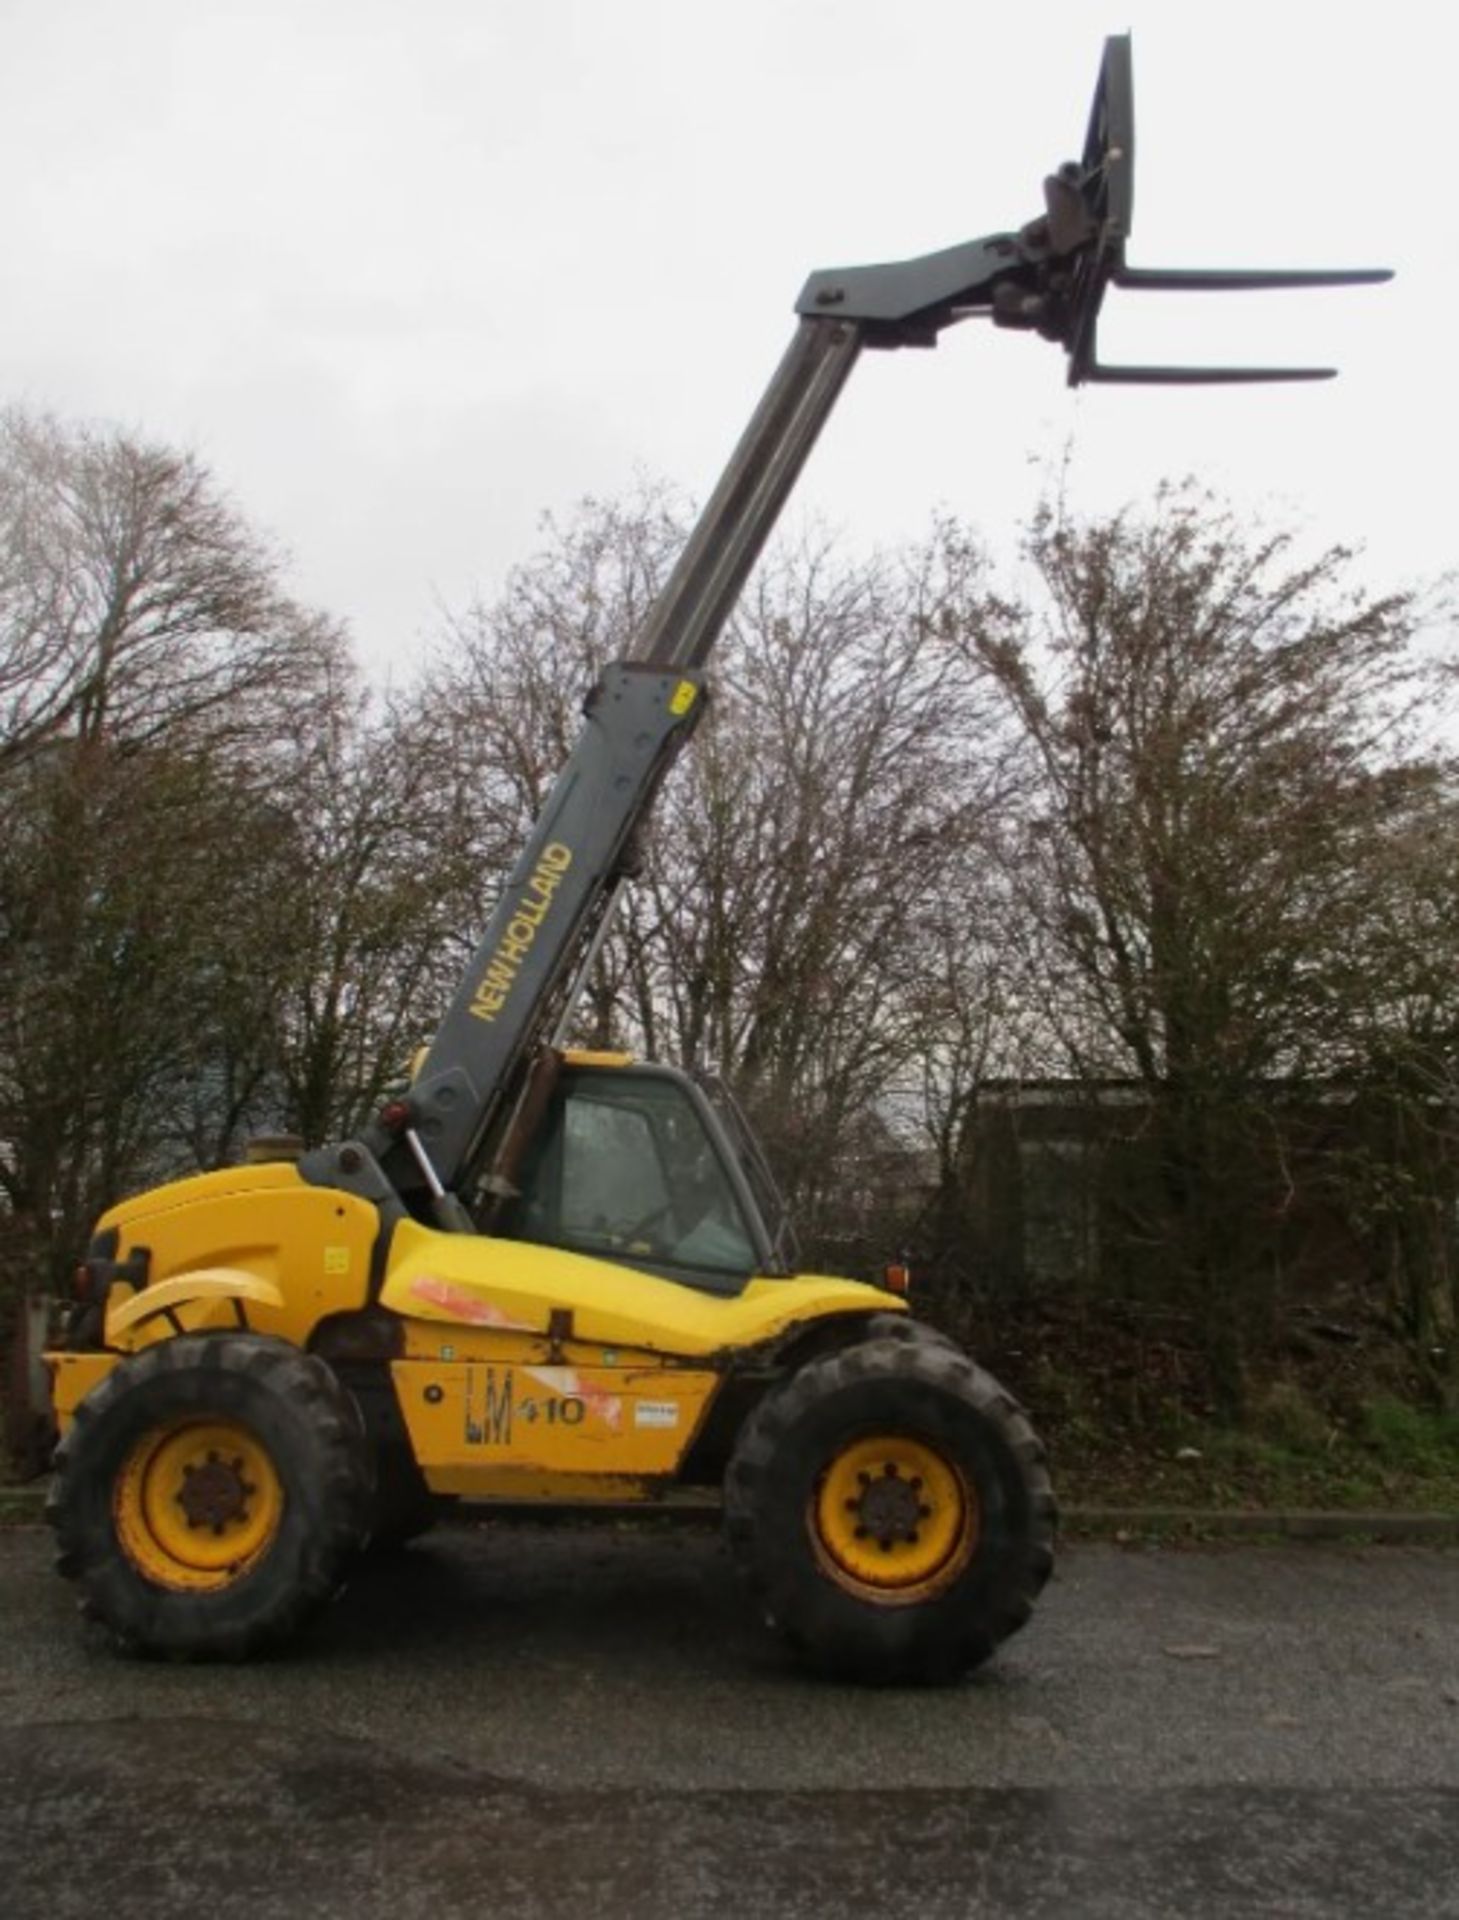 NEW HOLLAND LM410 TELEHANDLER - YOUR RELIABLE SOLUTION FOR HEAVY LIFTING - Bild 7 aus 11